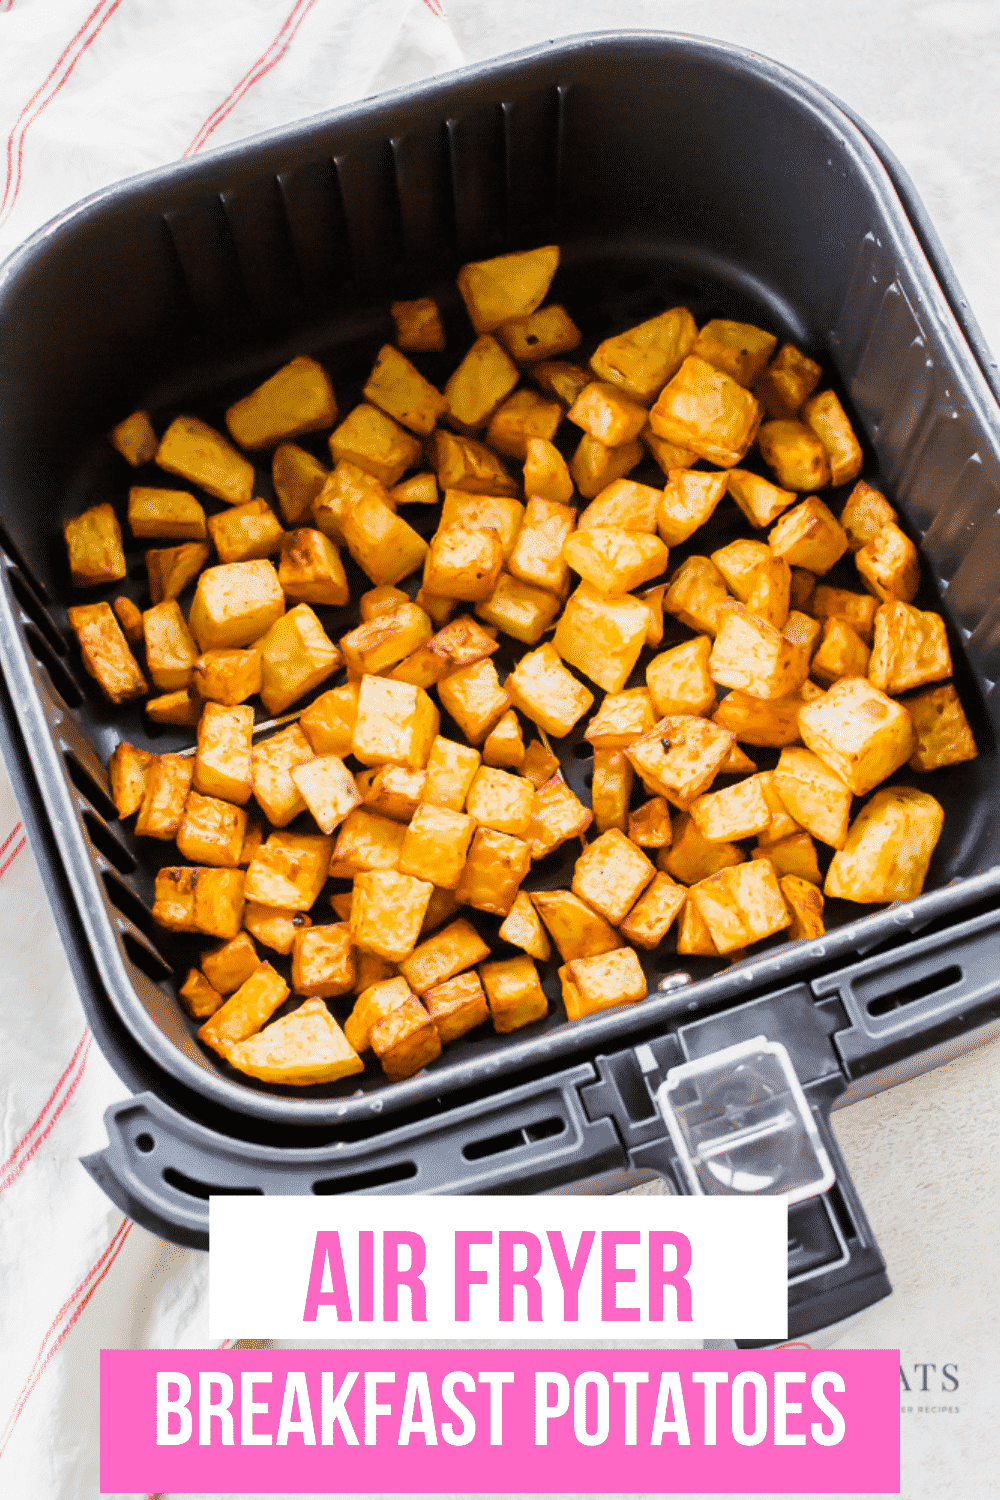 There is no better addition to a home cooked breakfast than crispy air fryer breakfast potatoes. Learn how to make this simple and healthy breakfast side in under 25 minutes. #breakfast via @vegetarianmamma